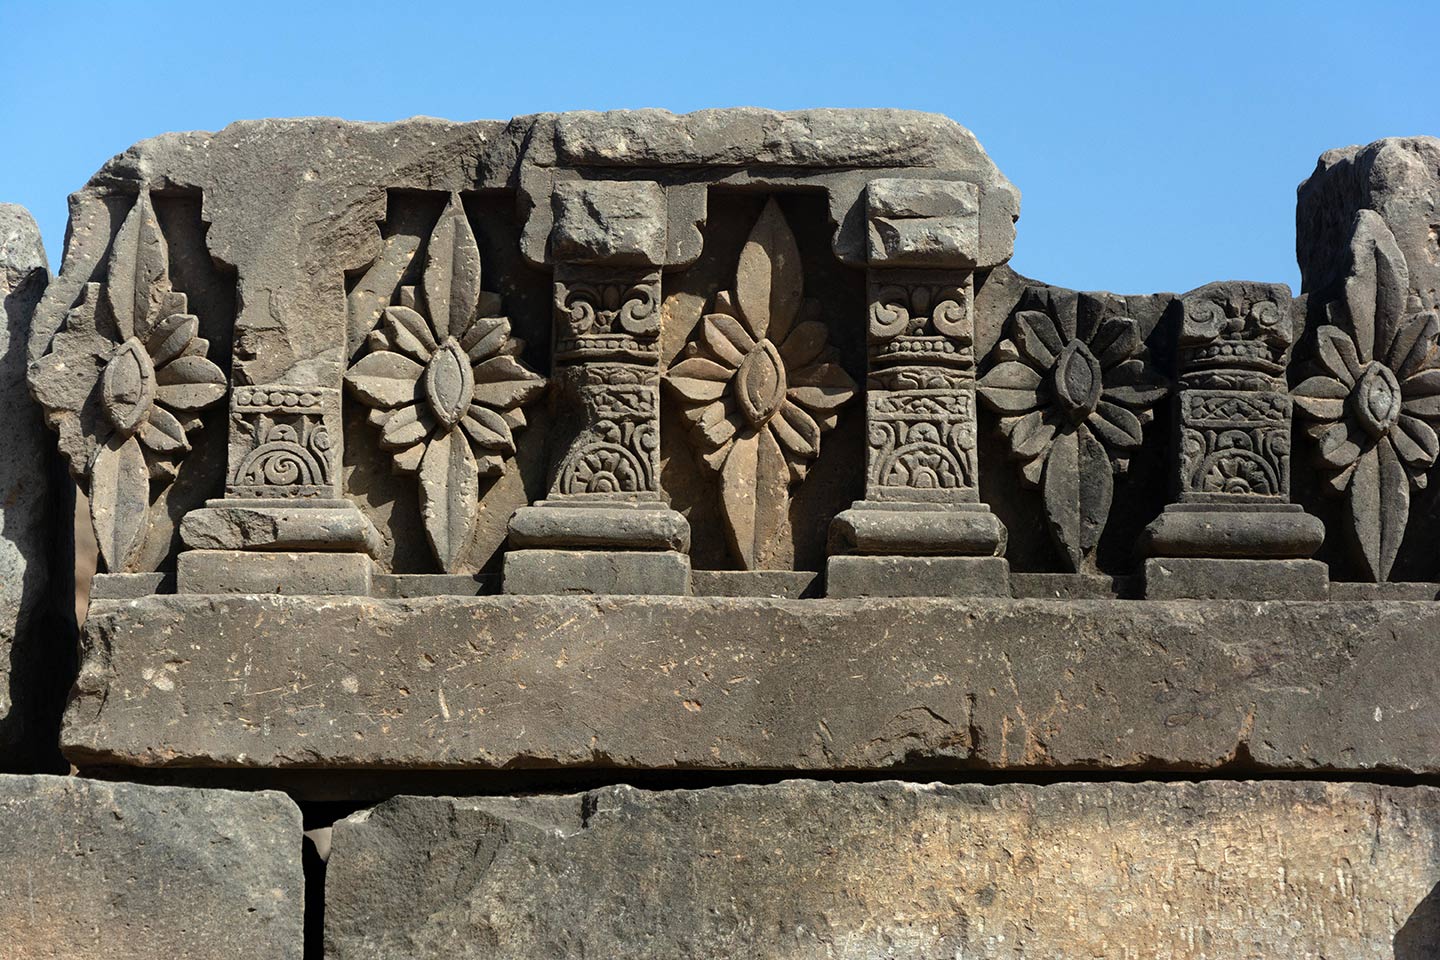 Relief carvings of geometric floriated patterns can be seen all around the adhisthana.